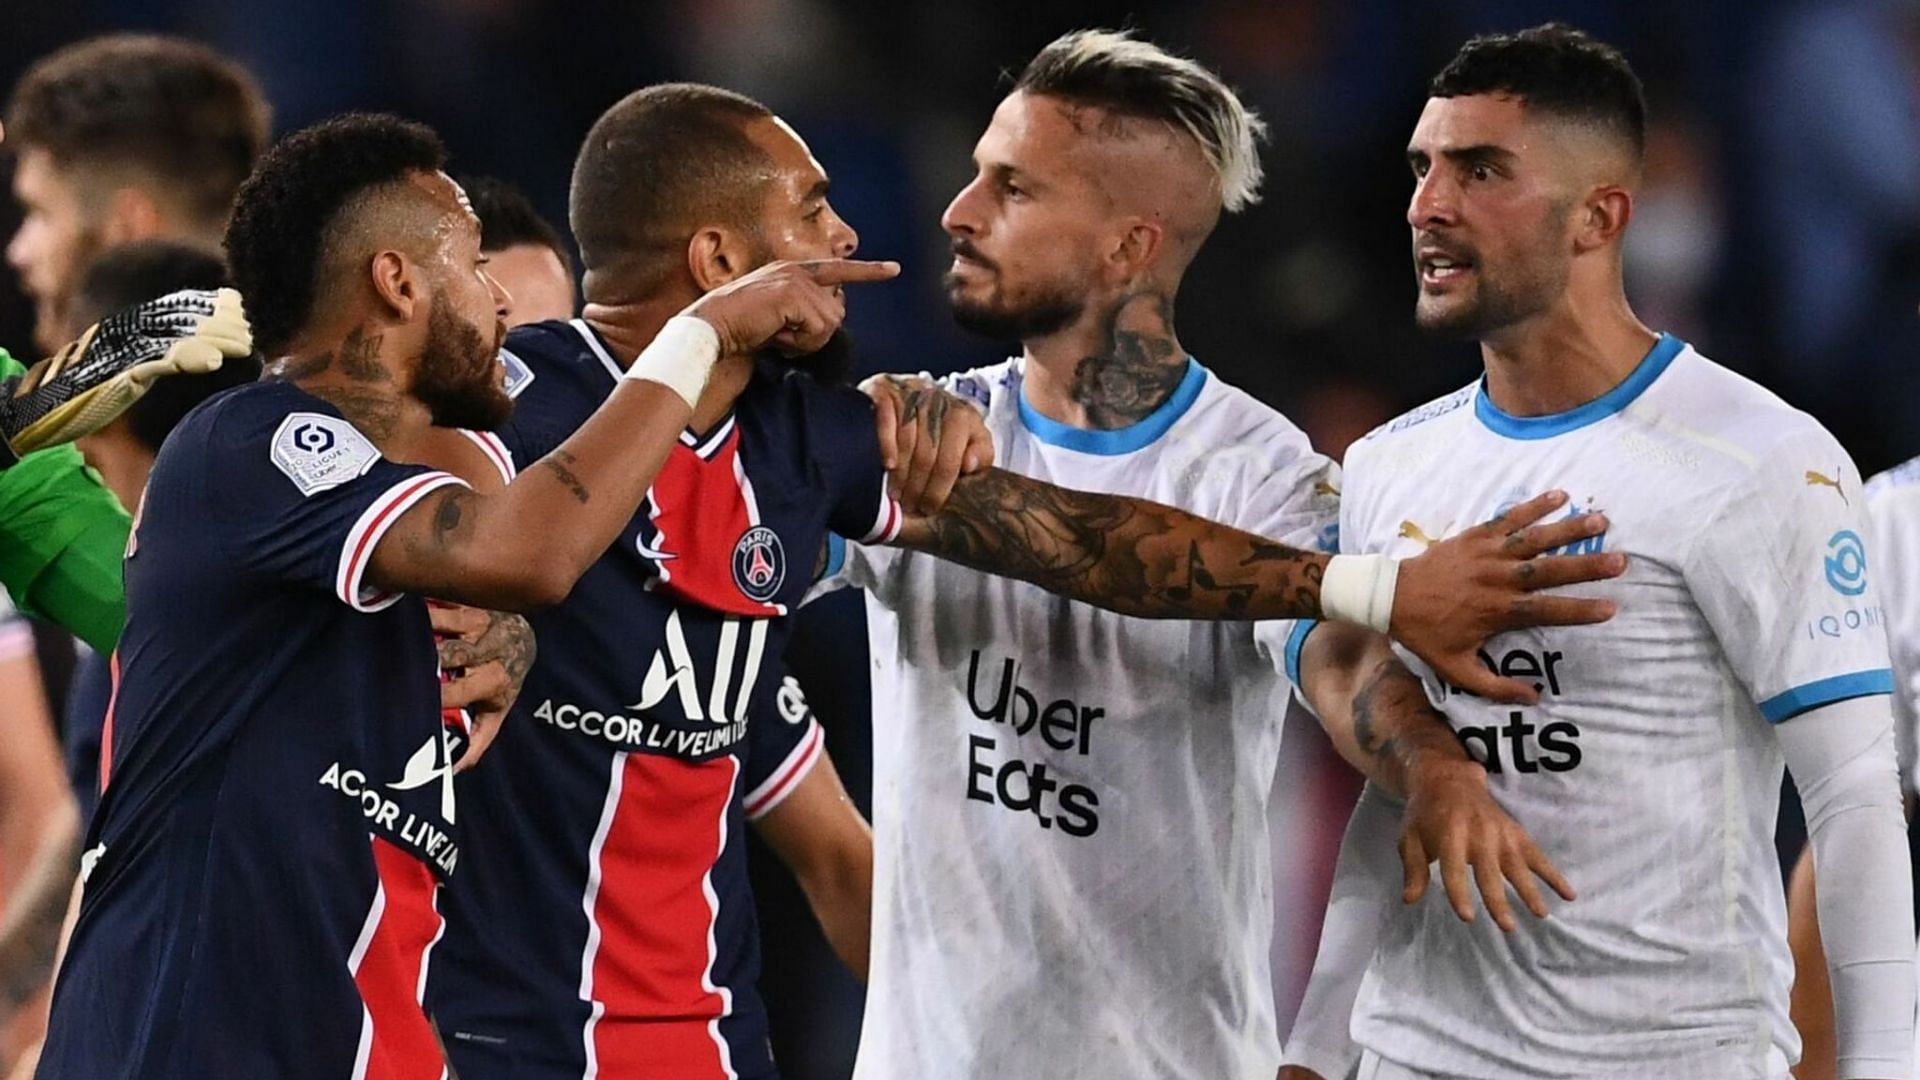 PSG and Marseille will clash in an exciting Ligue 1 showdown on Sunday